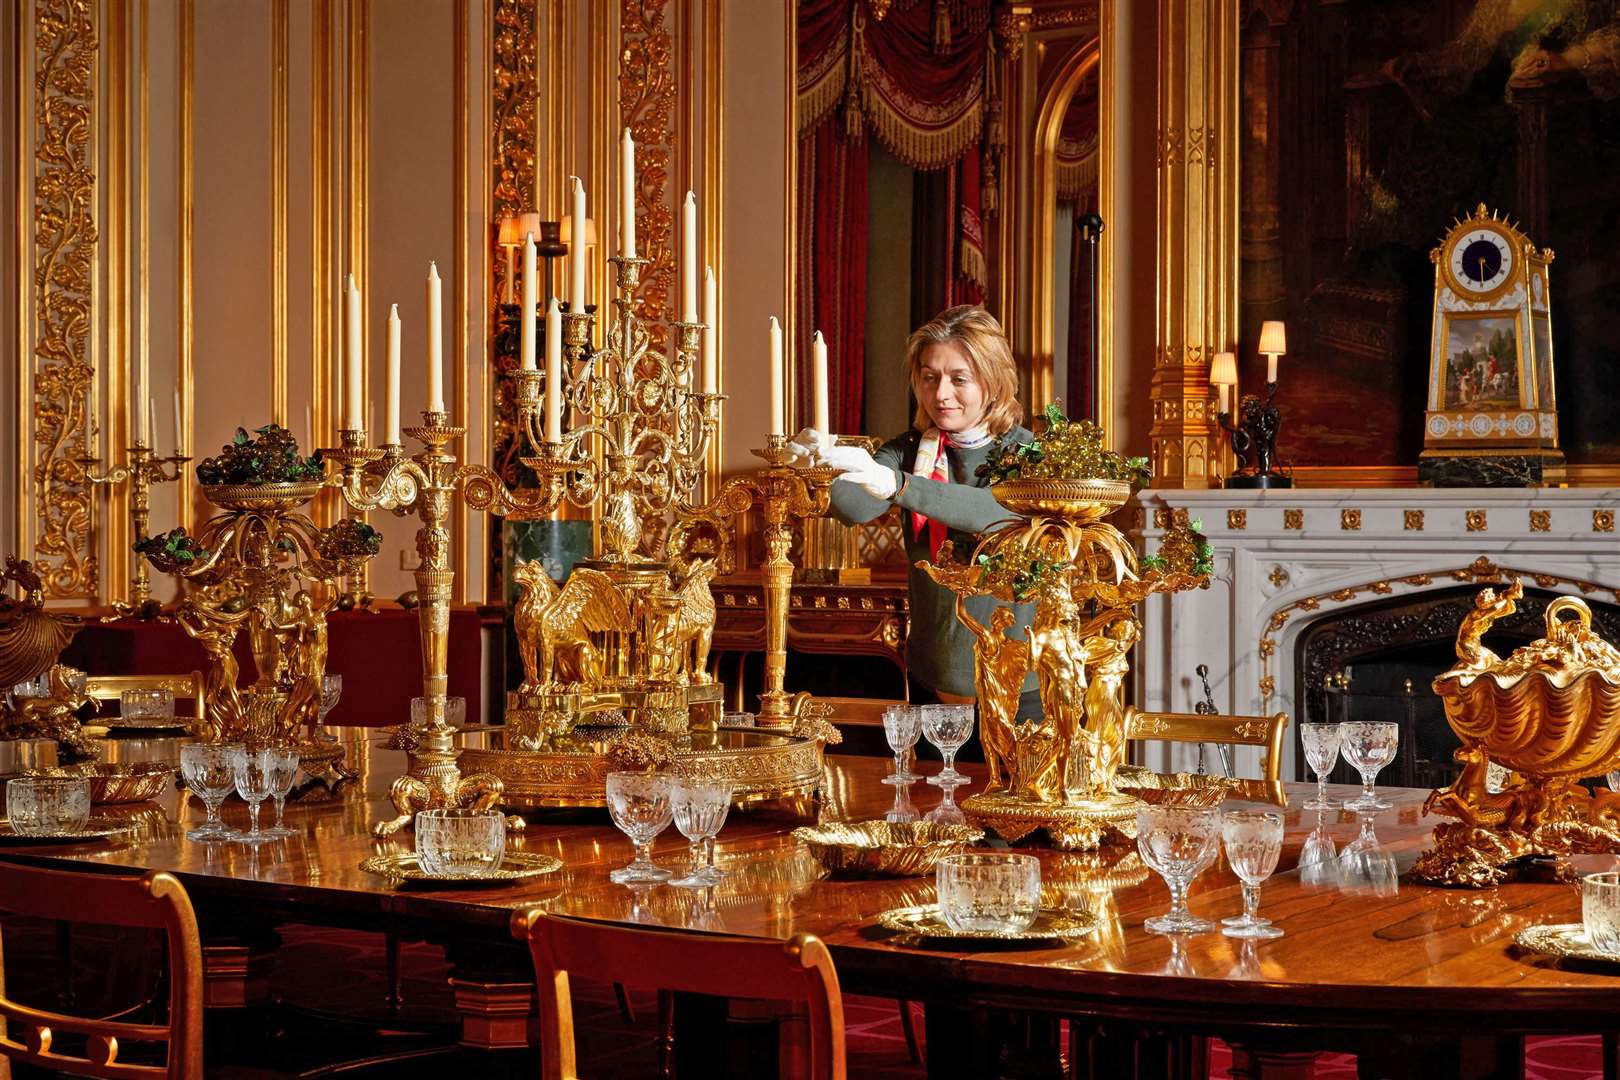 A curator puts the finishing touches on the display of the silver-gilt Grand Service in the State Dining Room (Royal Collection/Her Majesty Queen Elizabeth II 2020/PA)